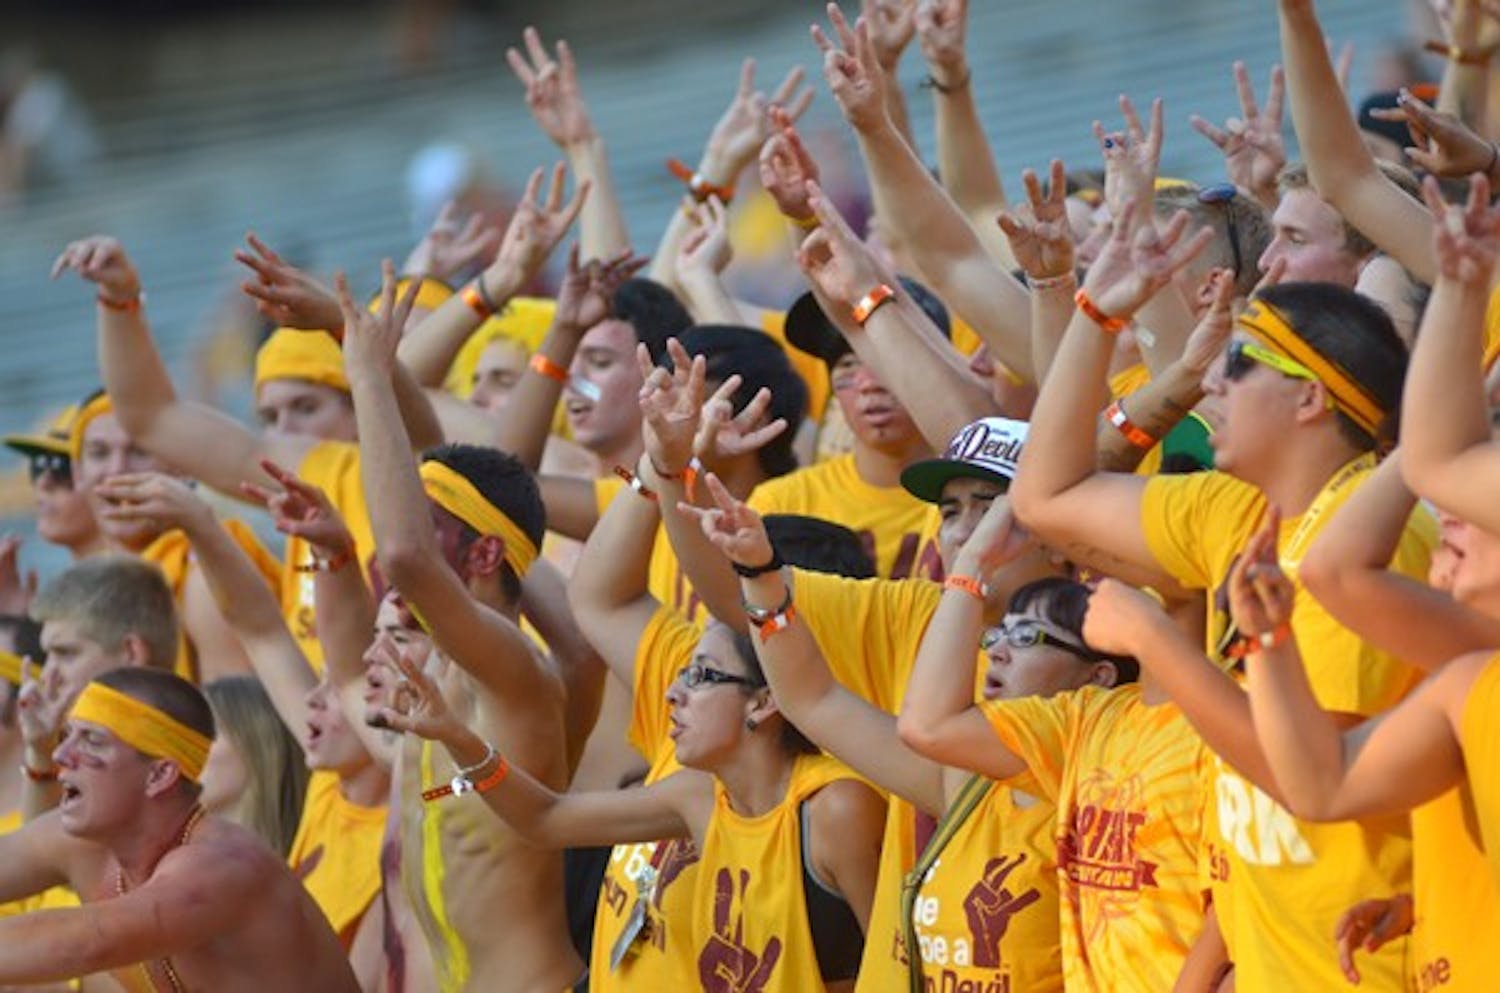 FAN FAVORITES: ASU supporters in the student section raise their pitchforks and cheer during Thursday night's football game against UC Davis.  The Sun Devils won their first game of the season 48-14. (Photo by Aaron Lavinsky)